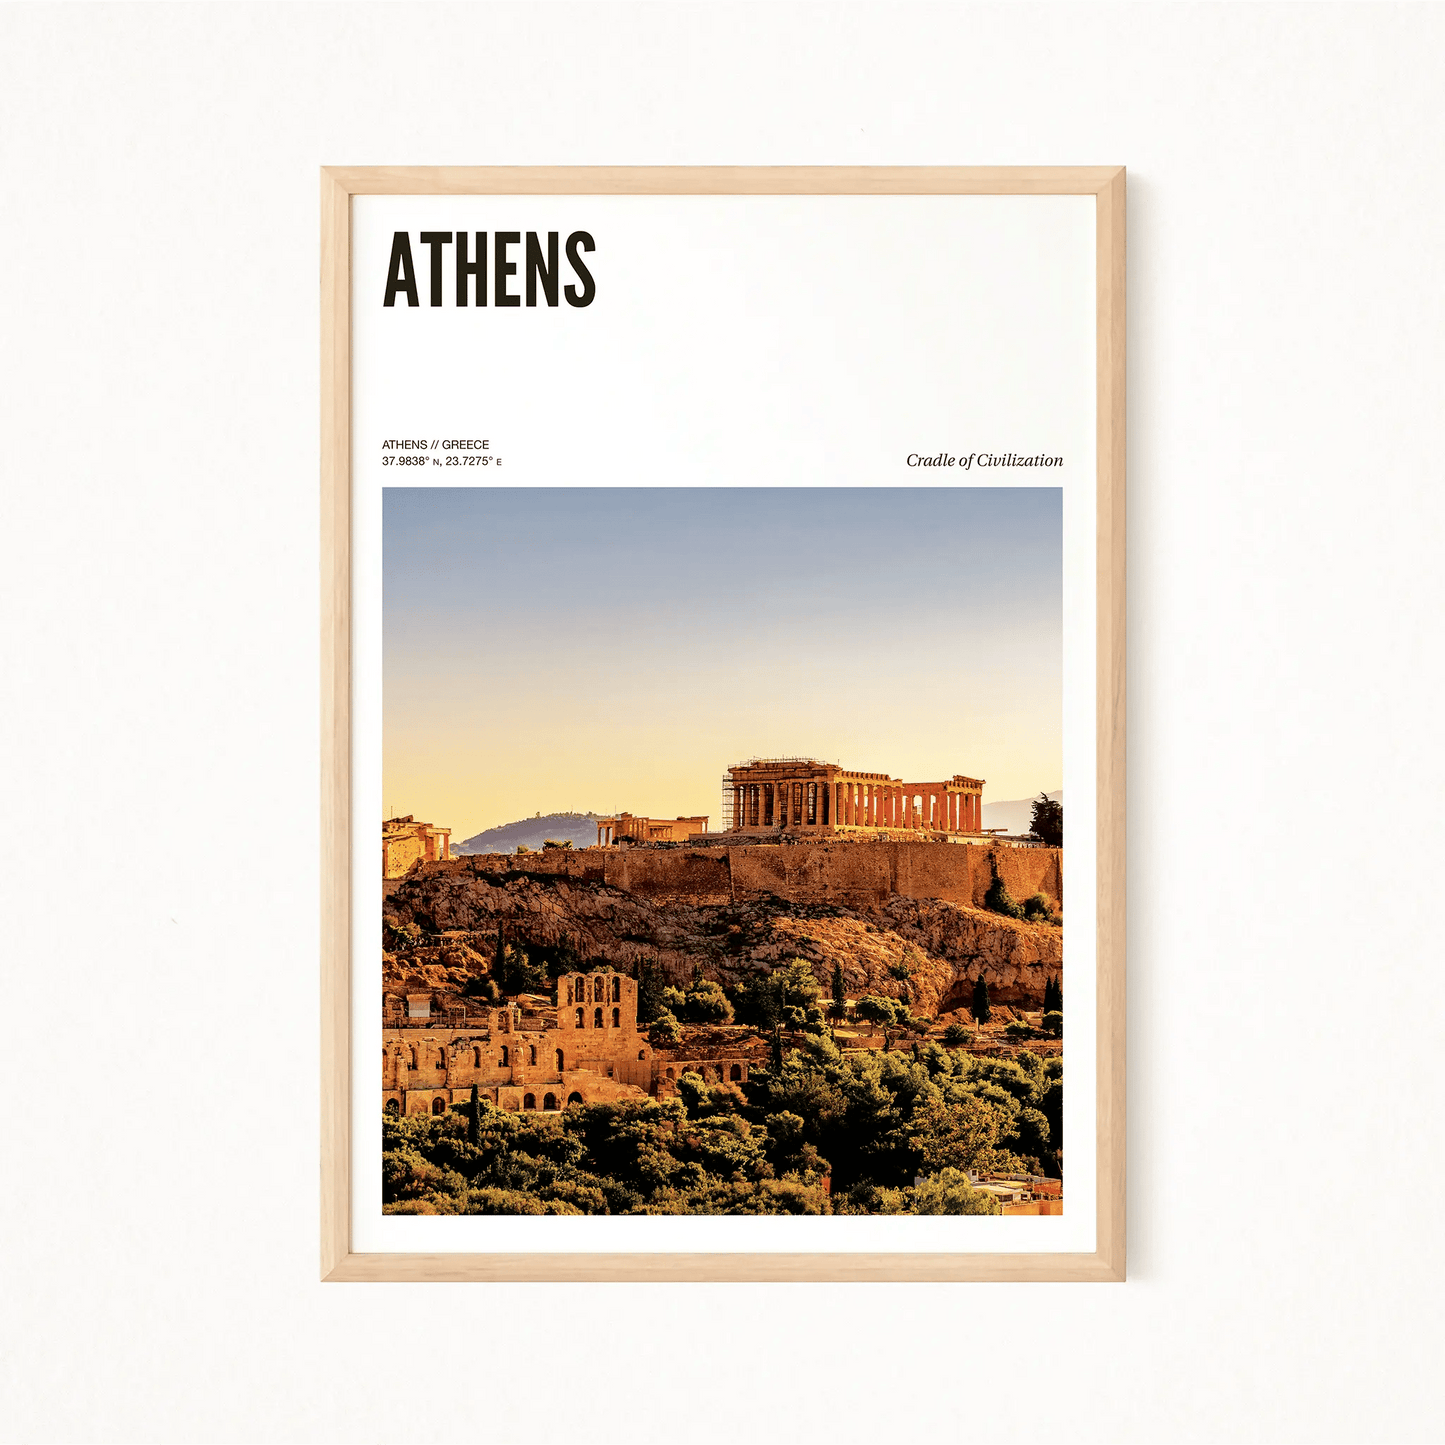 Athens Odyssey Poster - The Globe Gallery